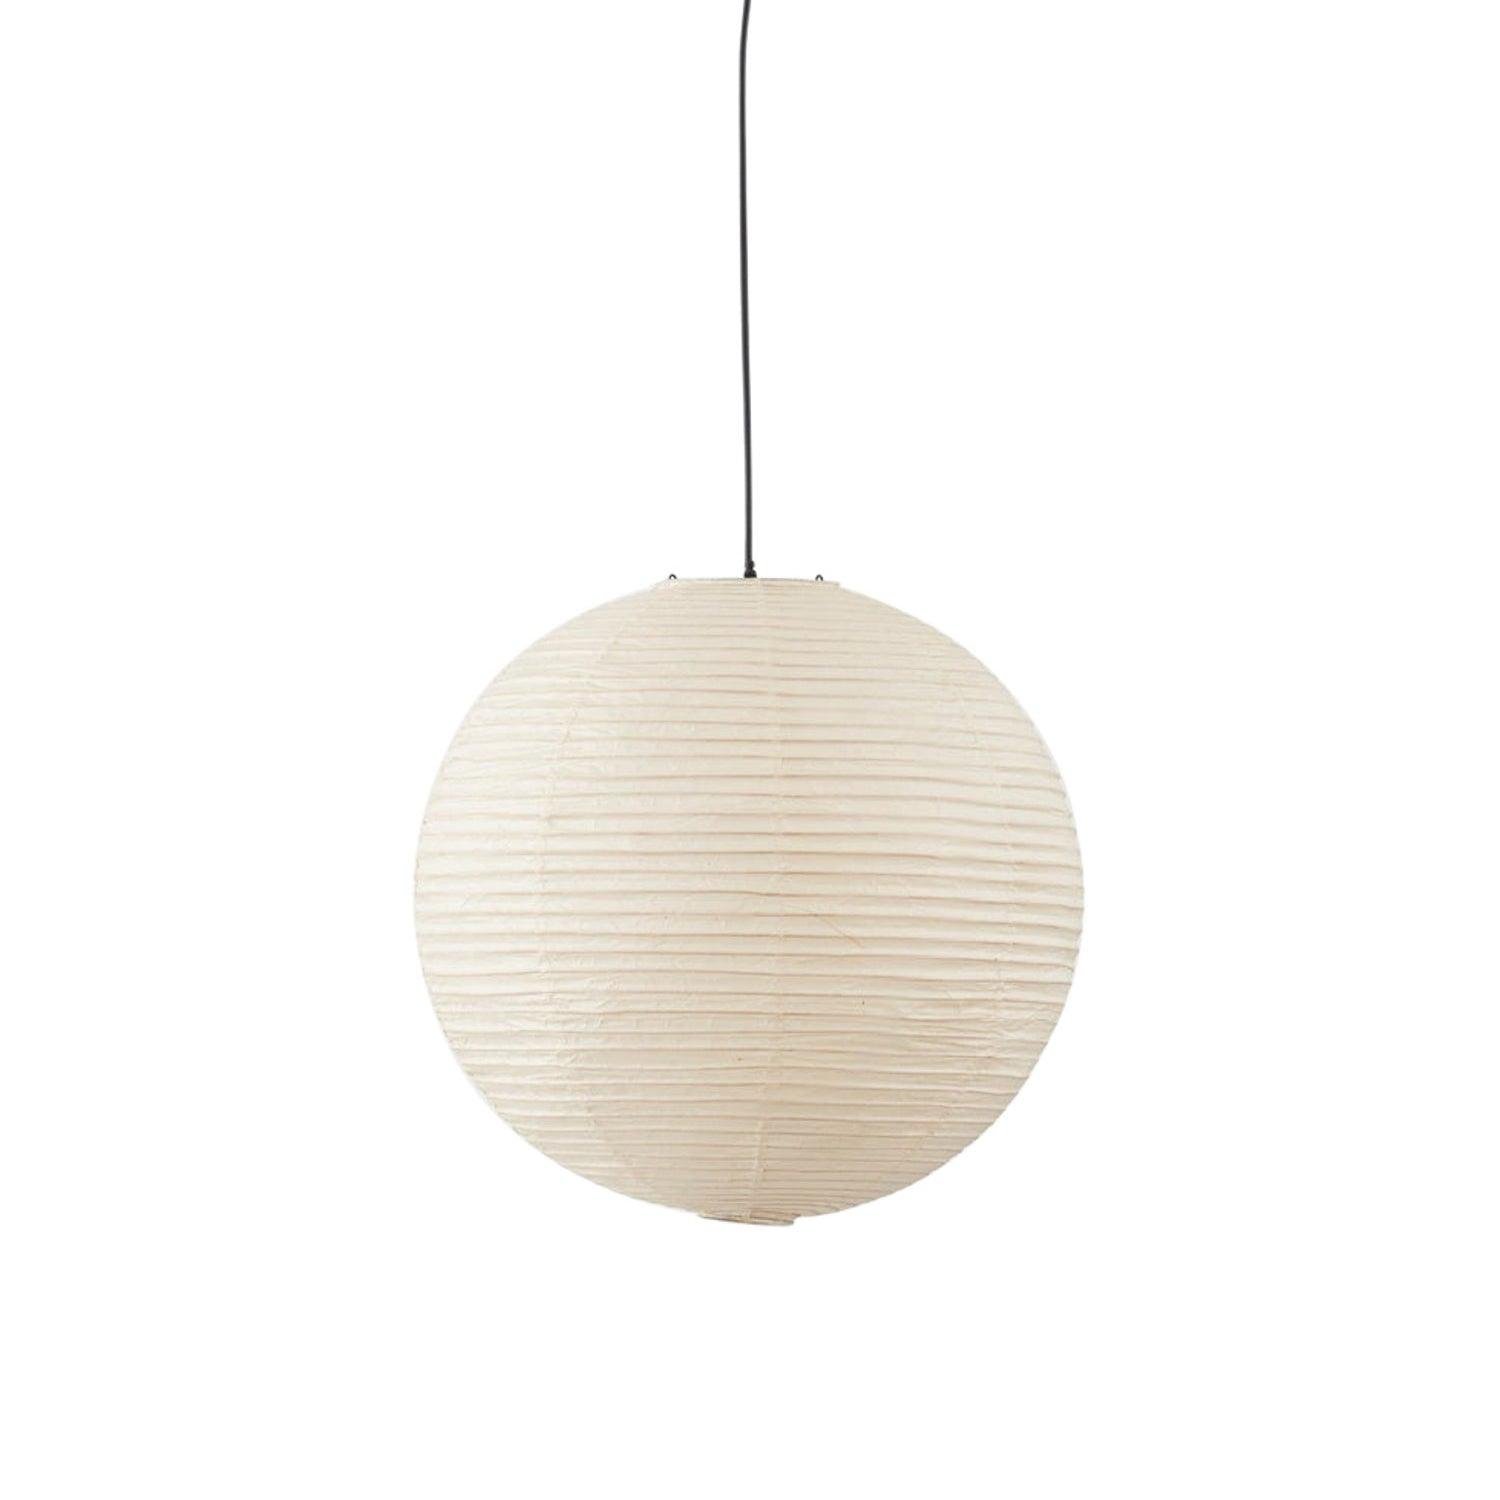 White Rice Paper Pendant Lamp, 15.7 inches in Diameter and Height (40cm x 40cm)